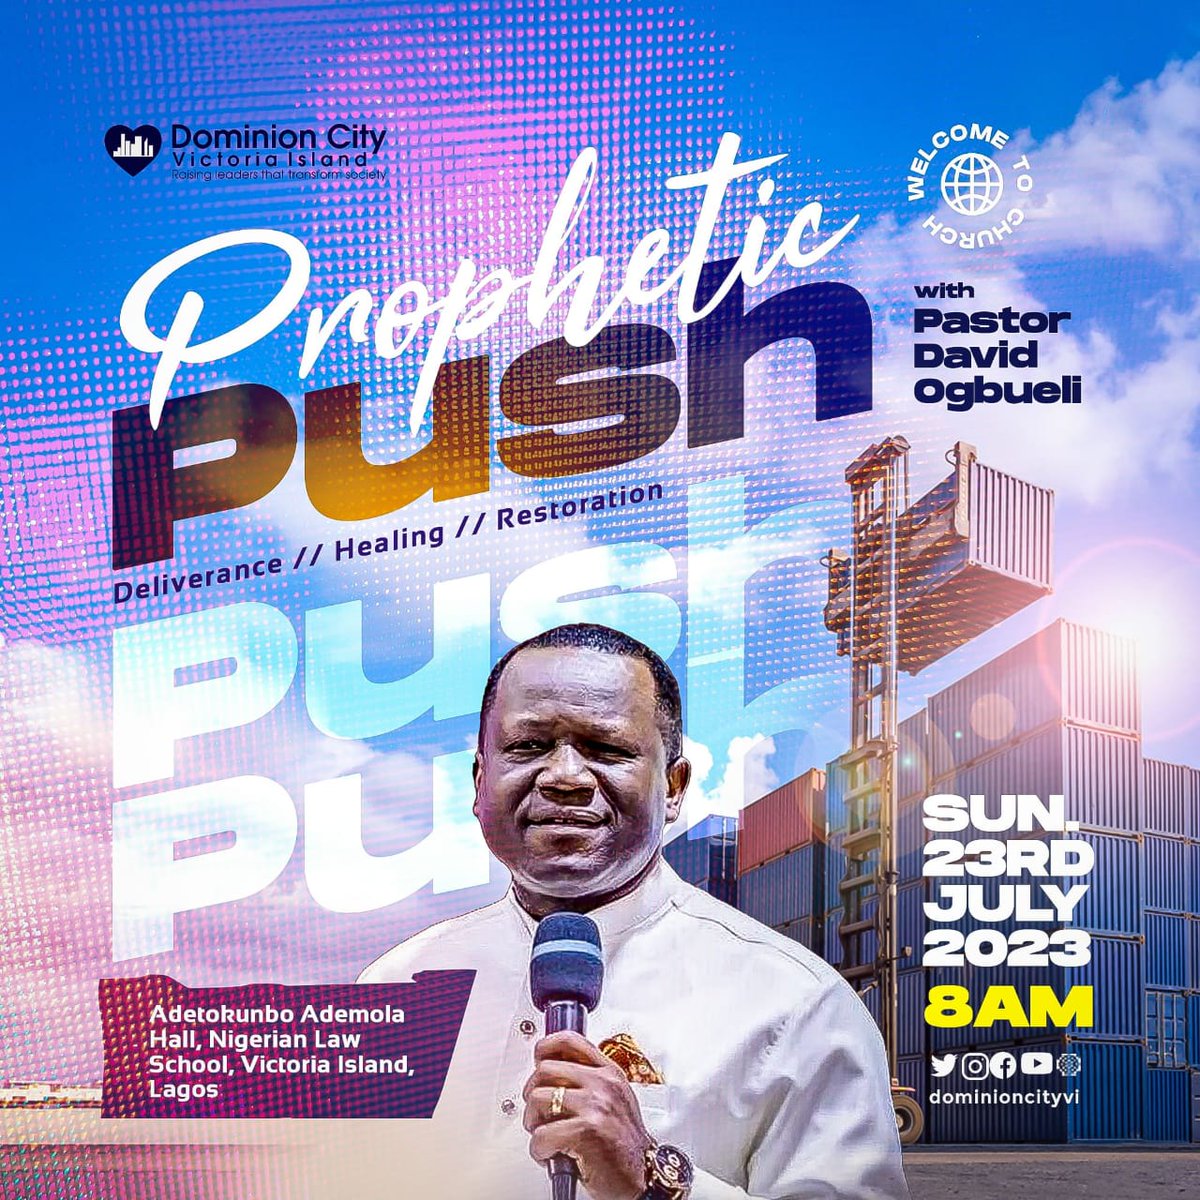 2 Chronicles 20:20 (KJV) Believe in the LORD your God, so shall ye be established; believe his prophets, so shall ye prosper. God's Prophet Rev David Ogbueli is with this Sunday. What are you believing God for - lots of Miracles... #PropheticPush #DominionCity #RevDavidOgbueli